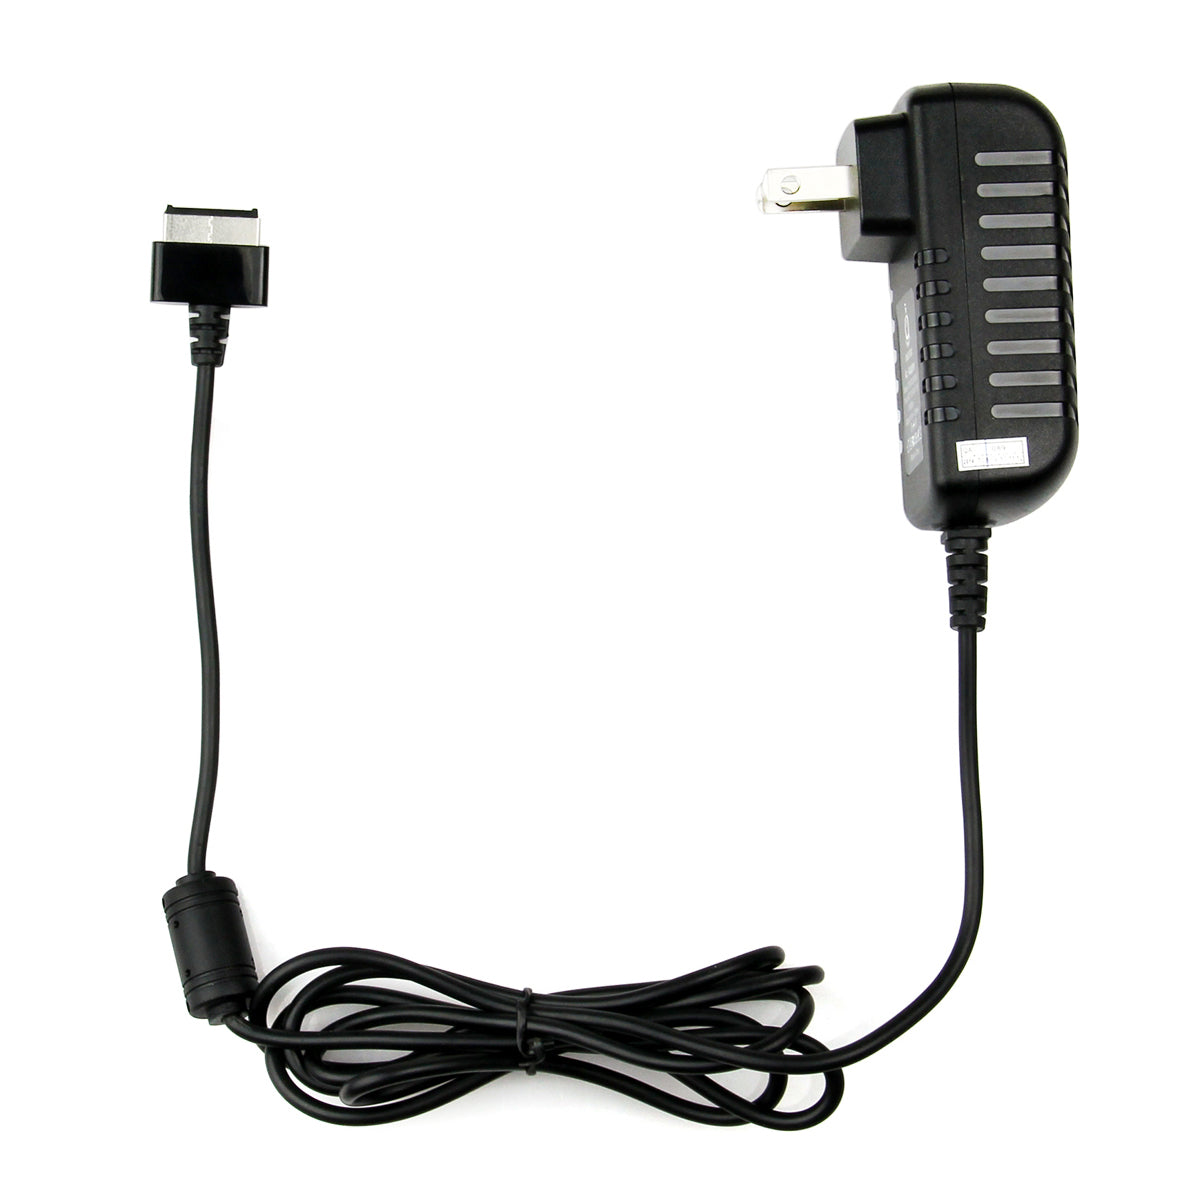 AC Adapter Charger for ASUS TF300TL Eee Pad.